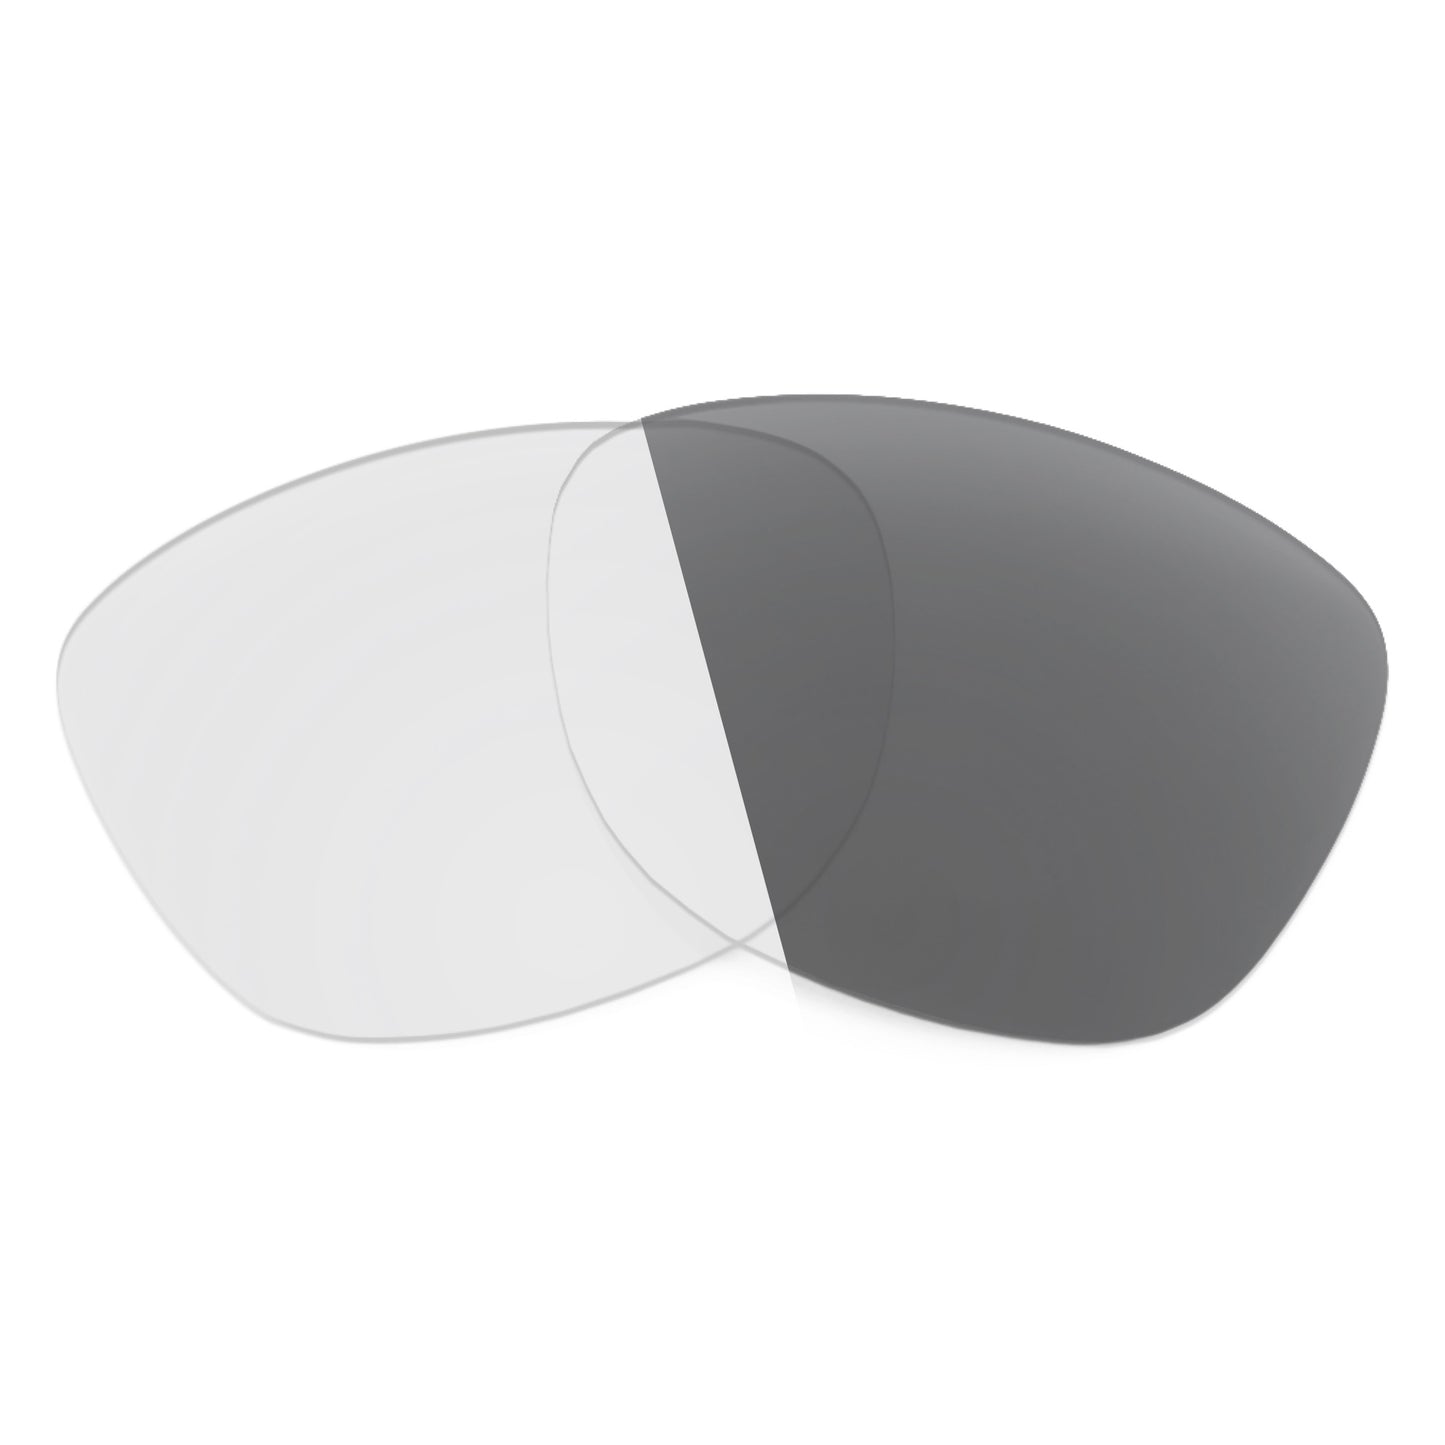 Revant replacement lenses for Ray-Ban RB4228 58mm Non-Polarized Adapt Gray Photochromic